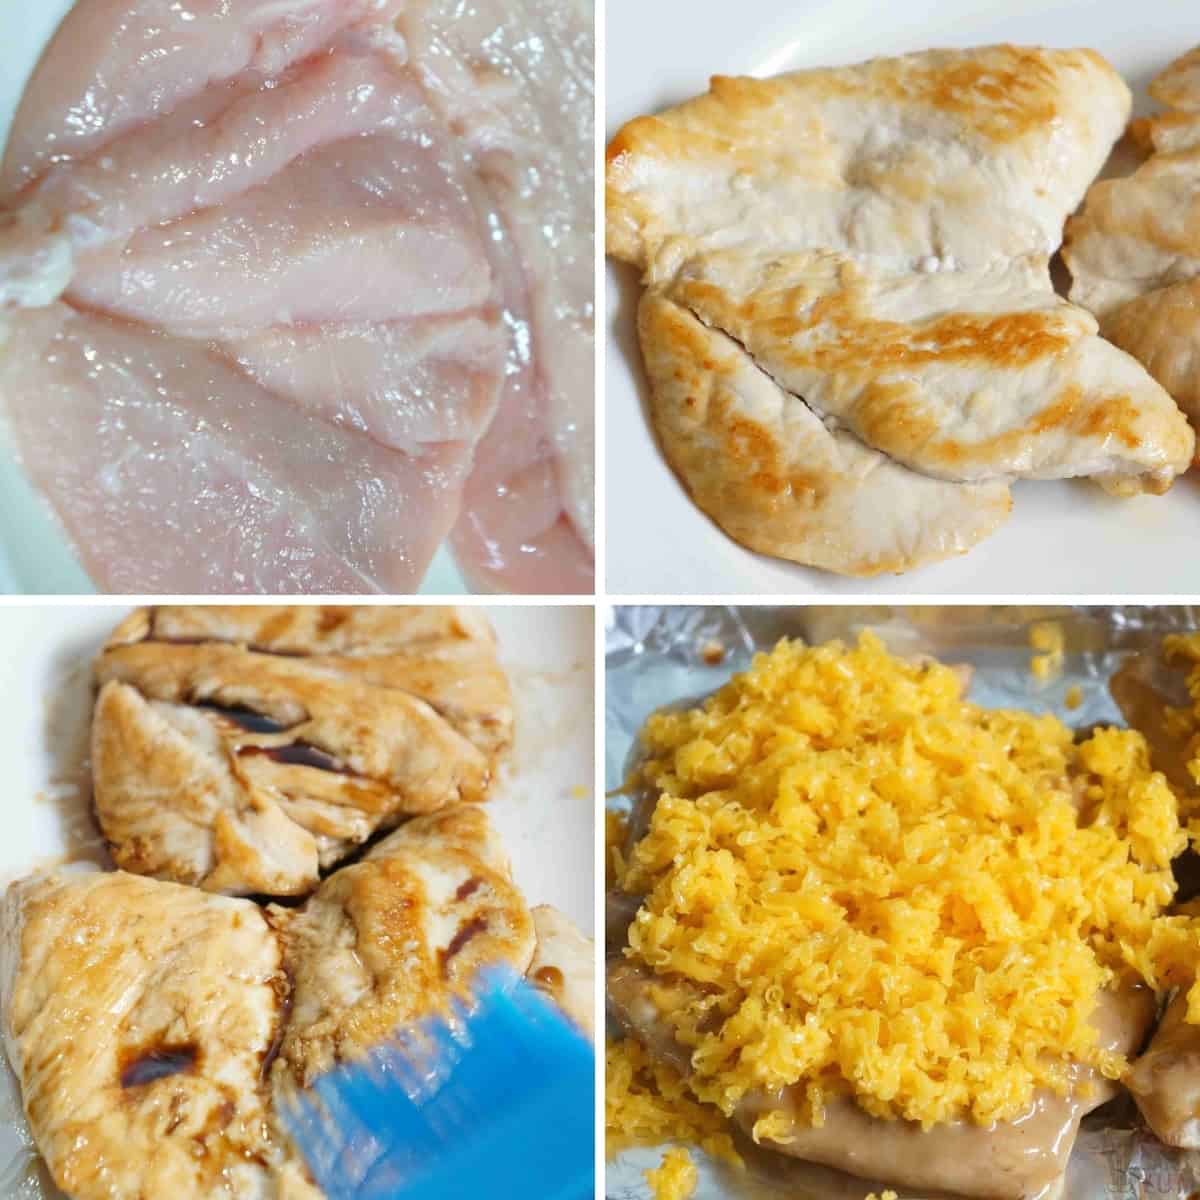 recipe steps to make the baked chicken dish